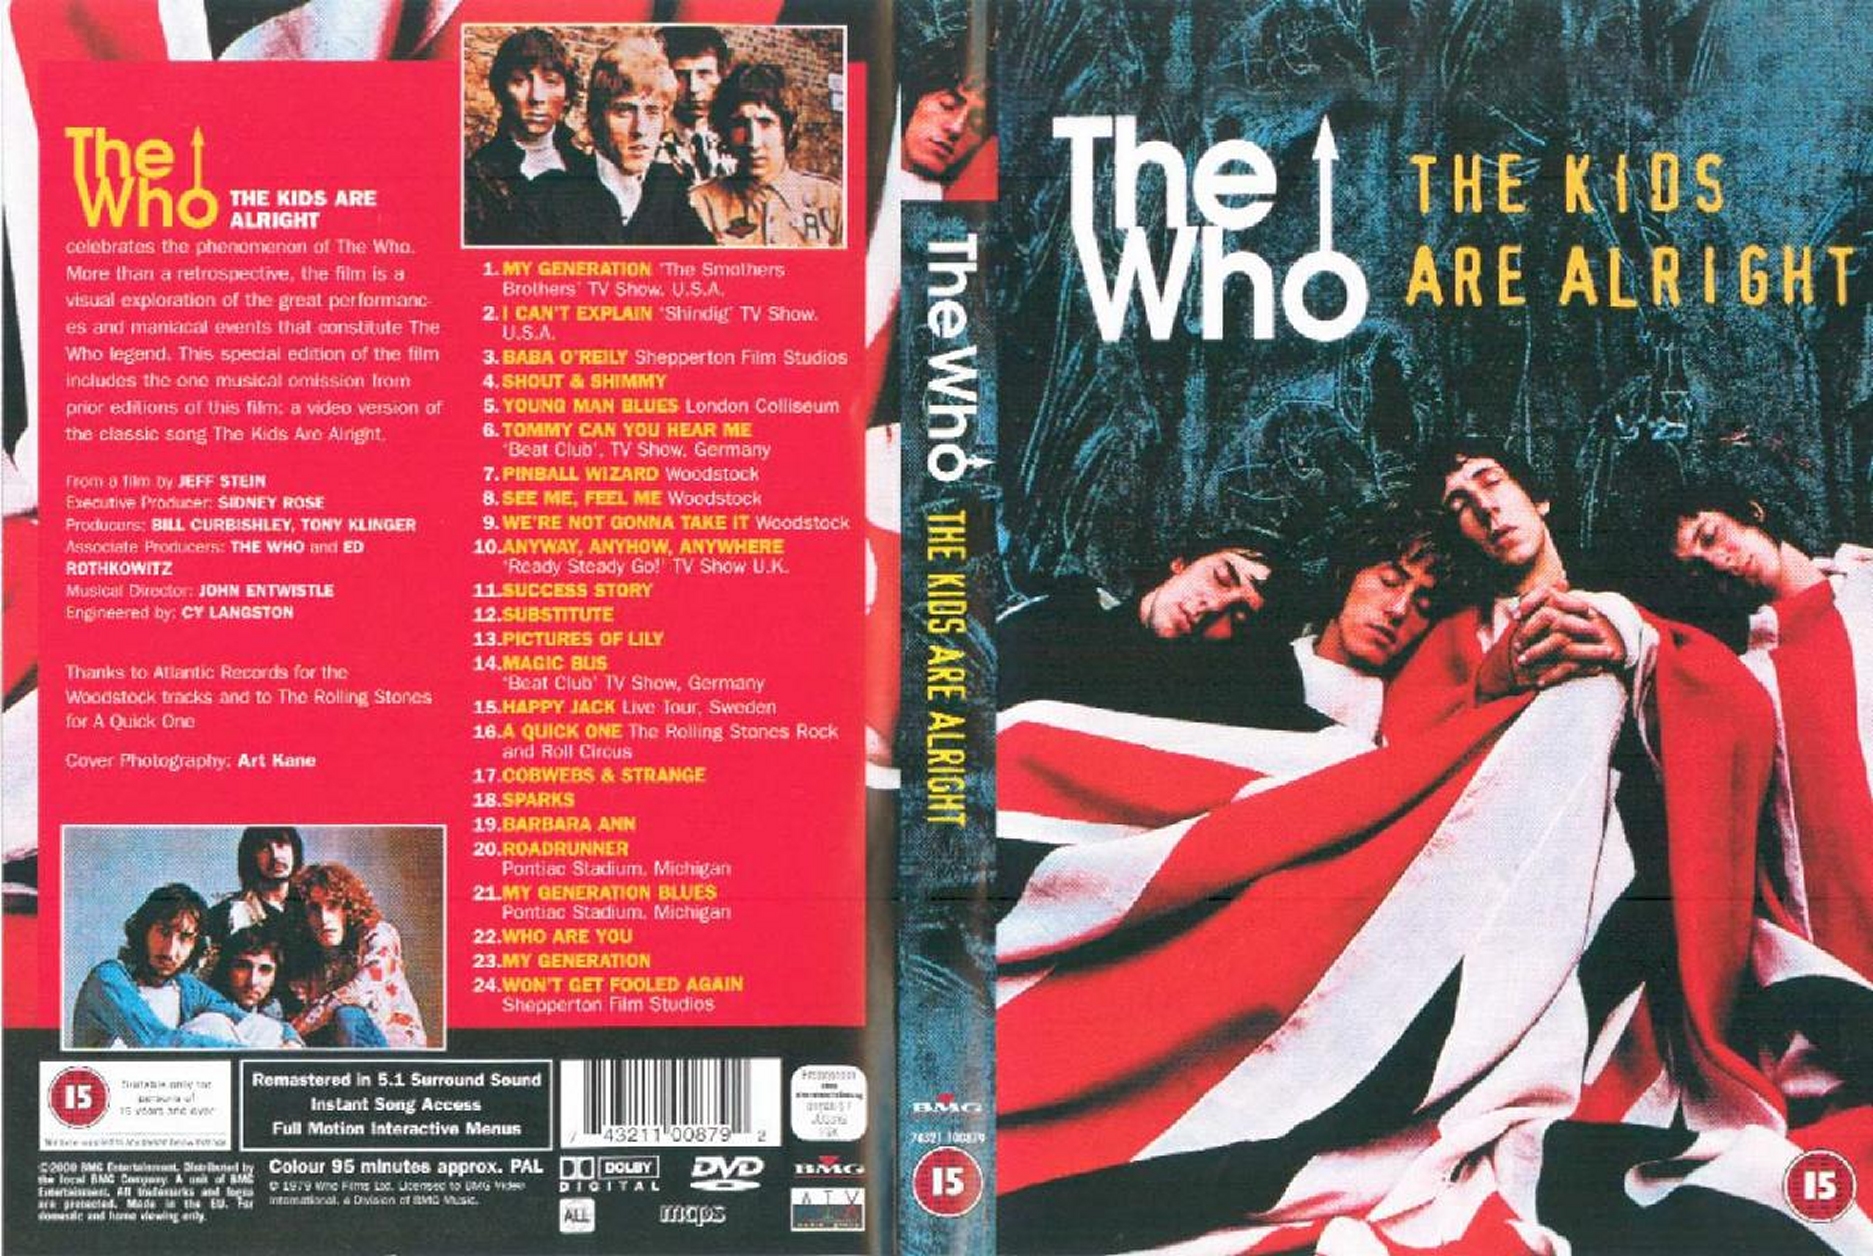 Jaquette DVD The Who - The Kids Are Alright